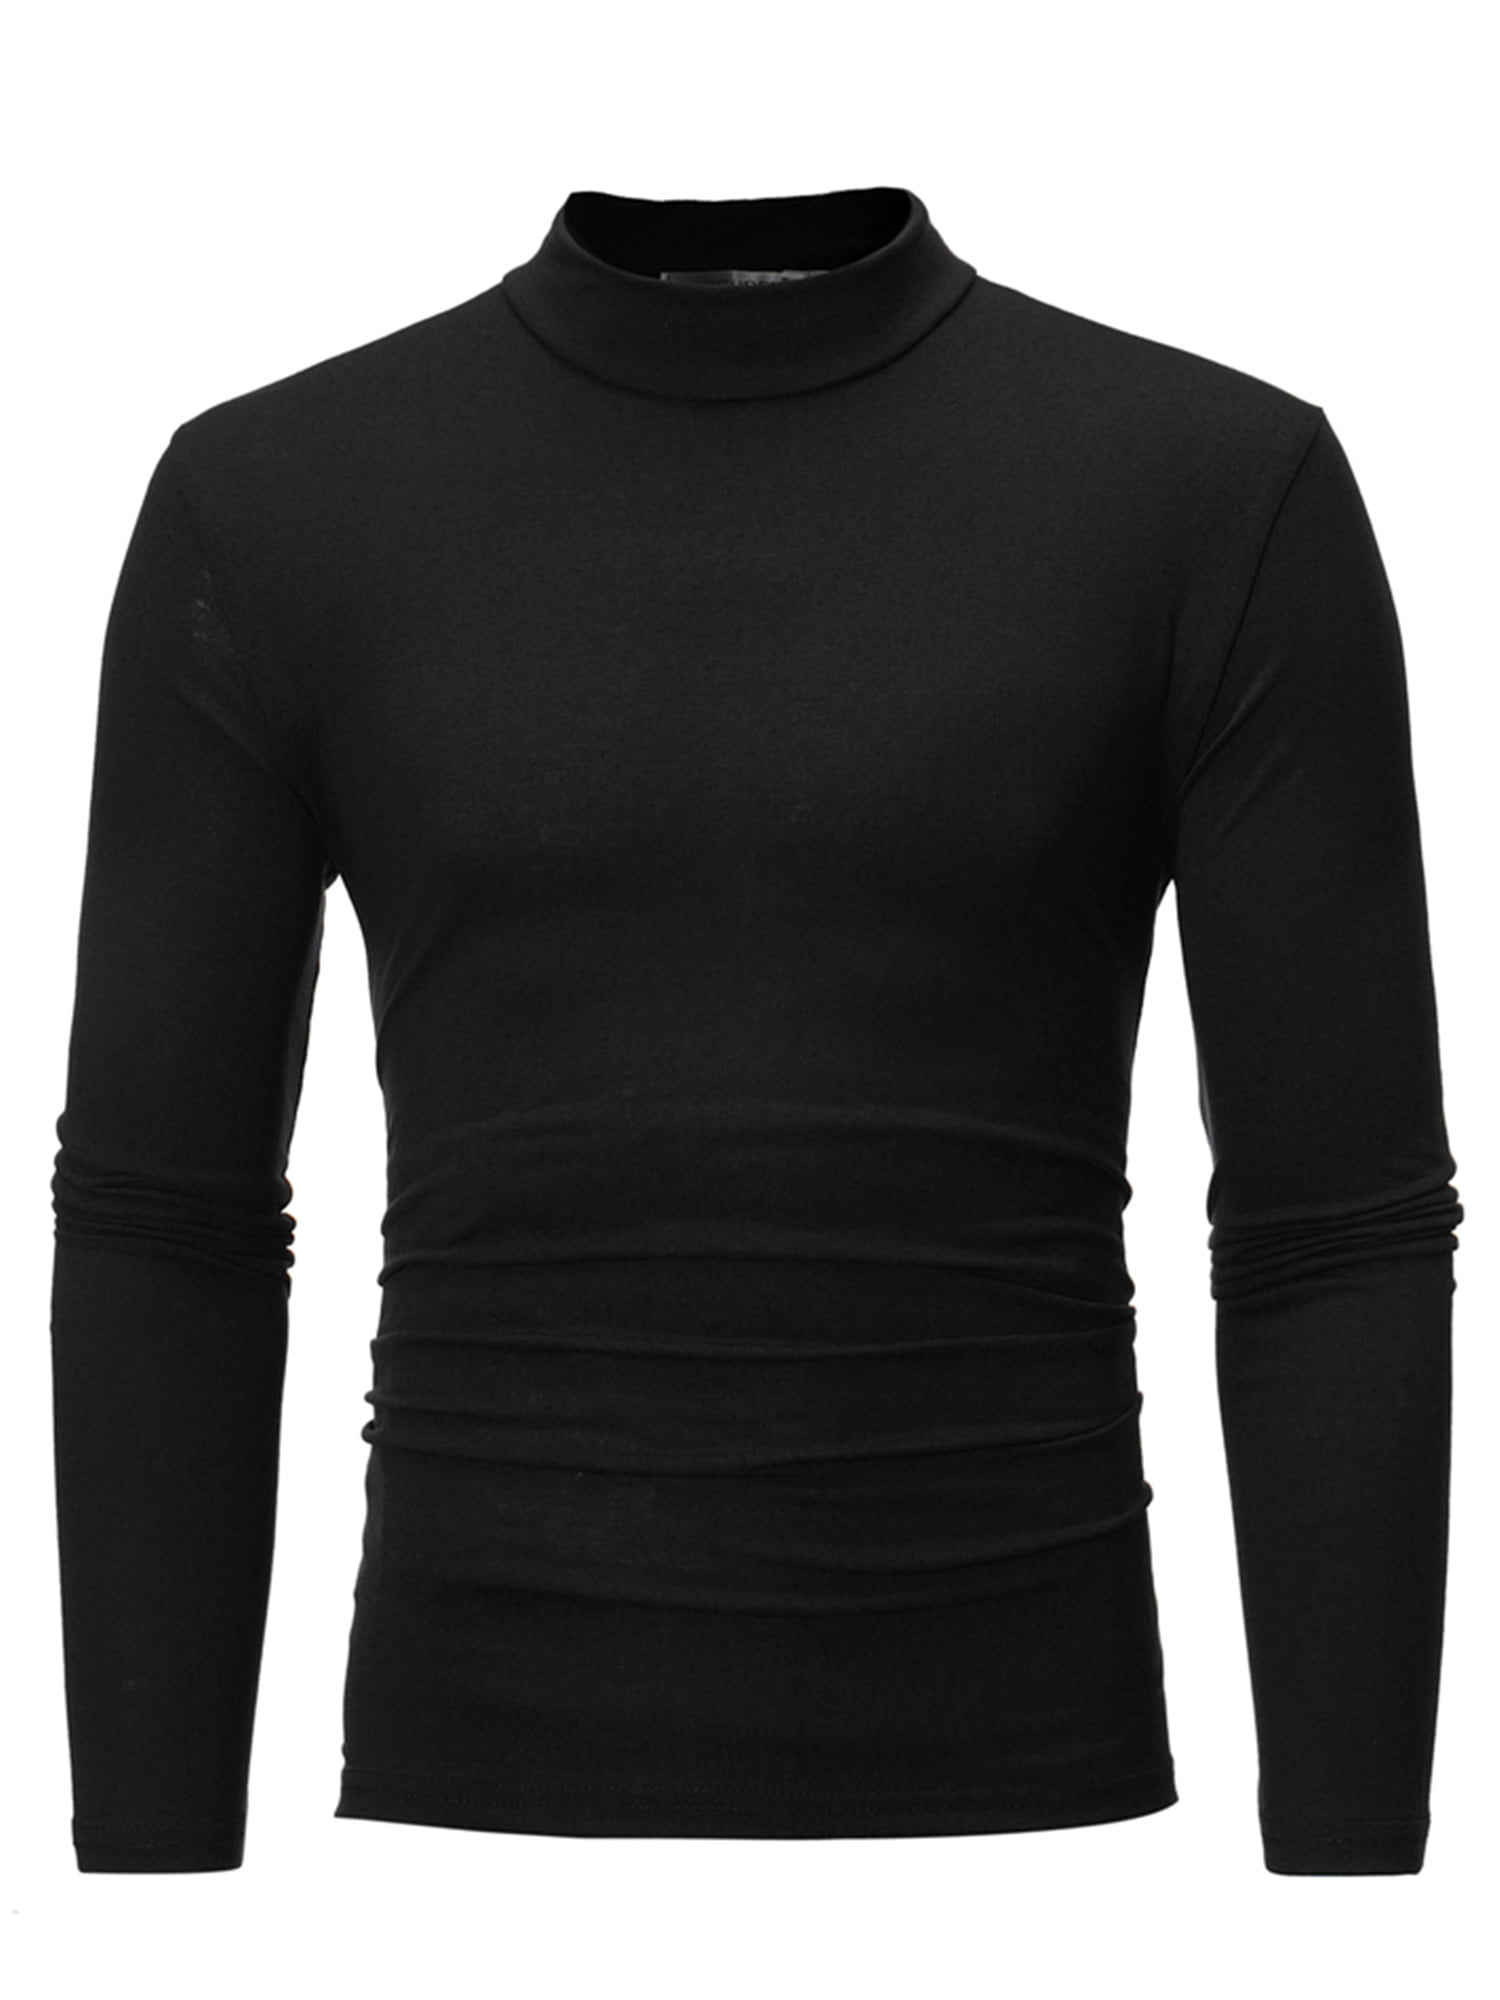 Men's Winter Thermal Turtleneck T Shirts Casual Slim Fit Basic Long Sleeve Pullover Big and Tall Baselayers Tops